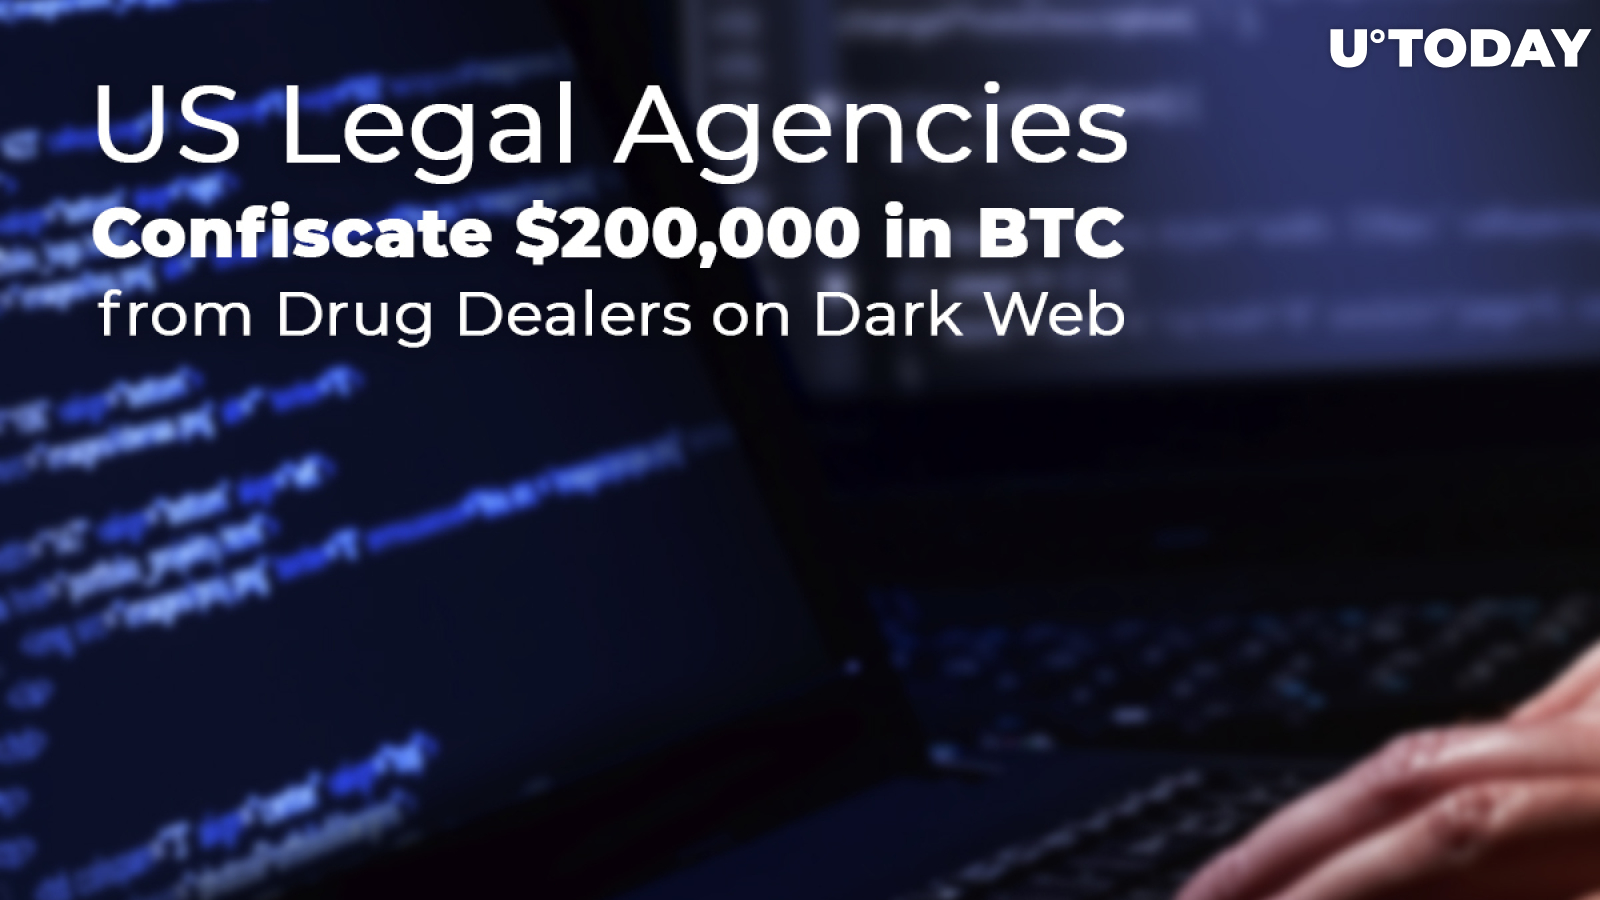 Bitcoin Crime: US Legal Agencies Confiscate $200,000 in BTC from Drug Dealers on Dark Web